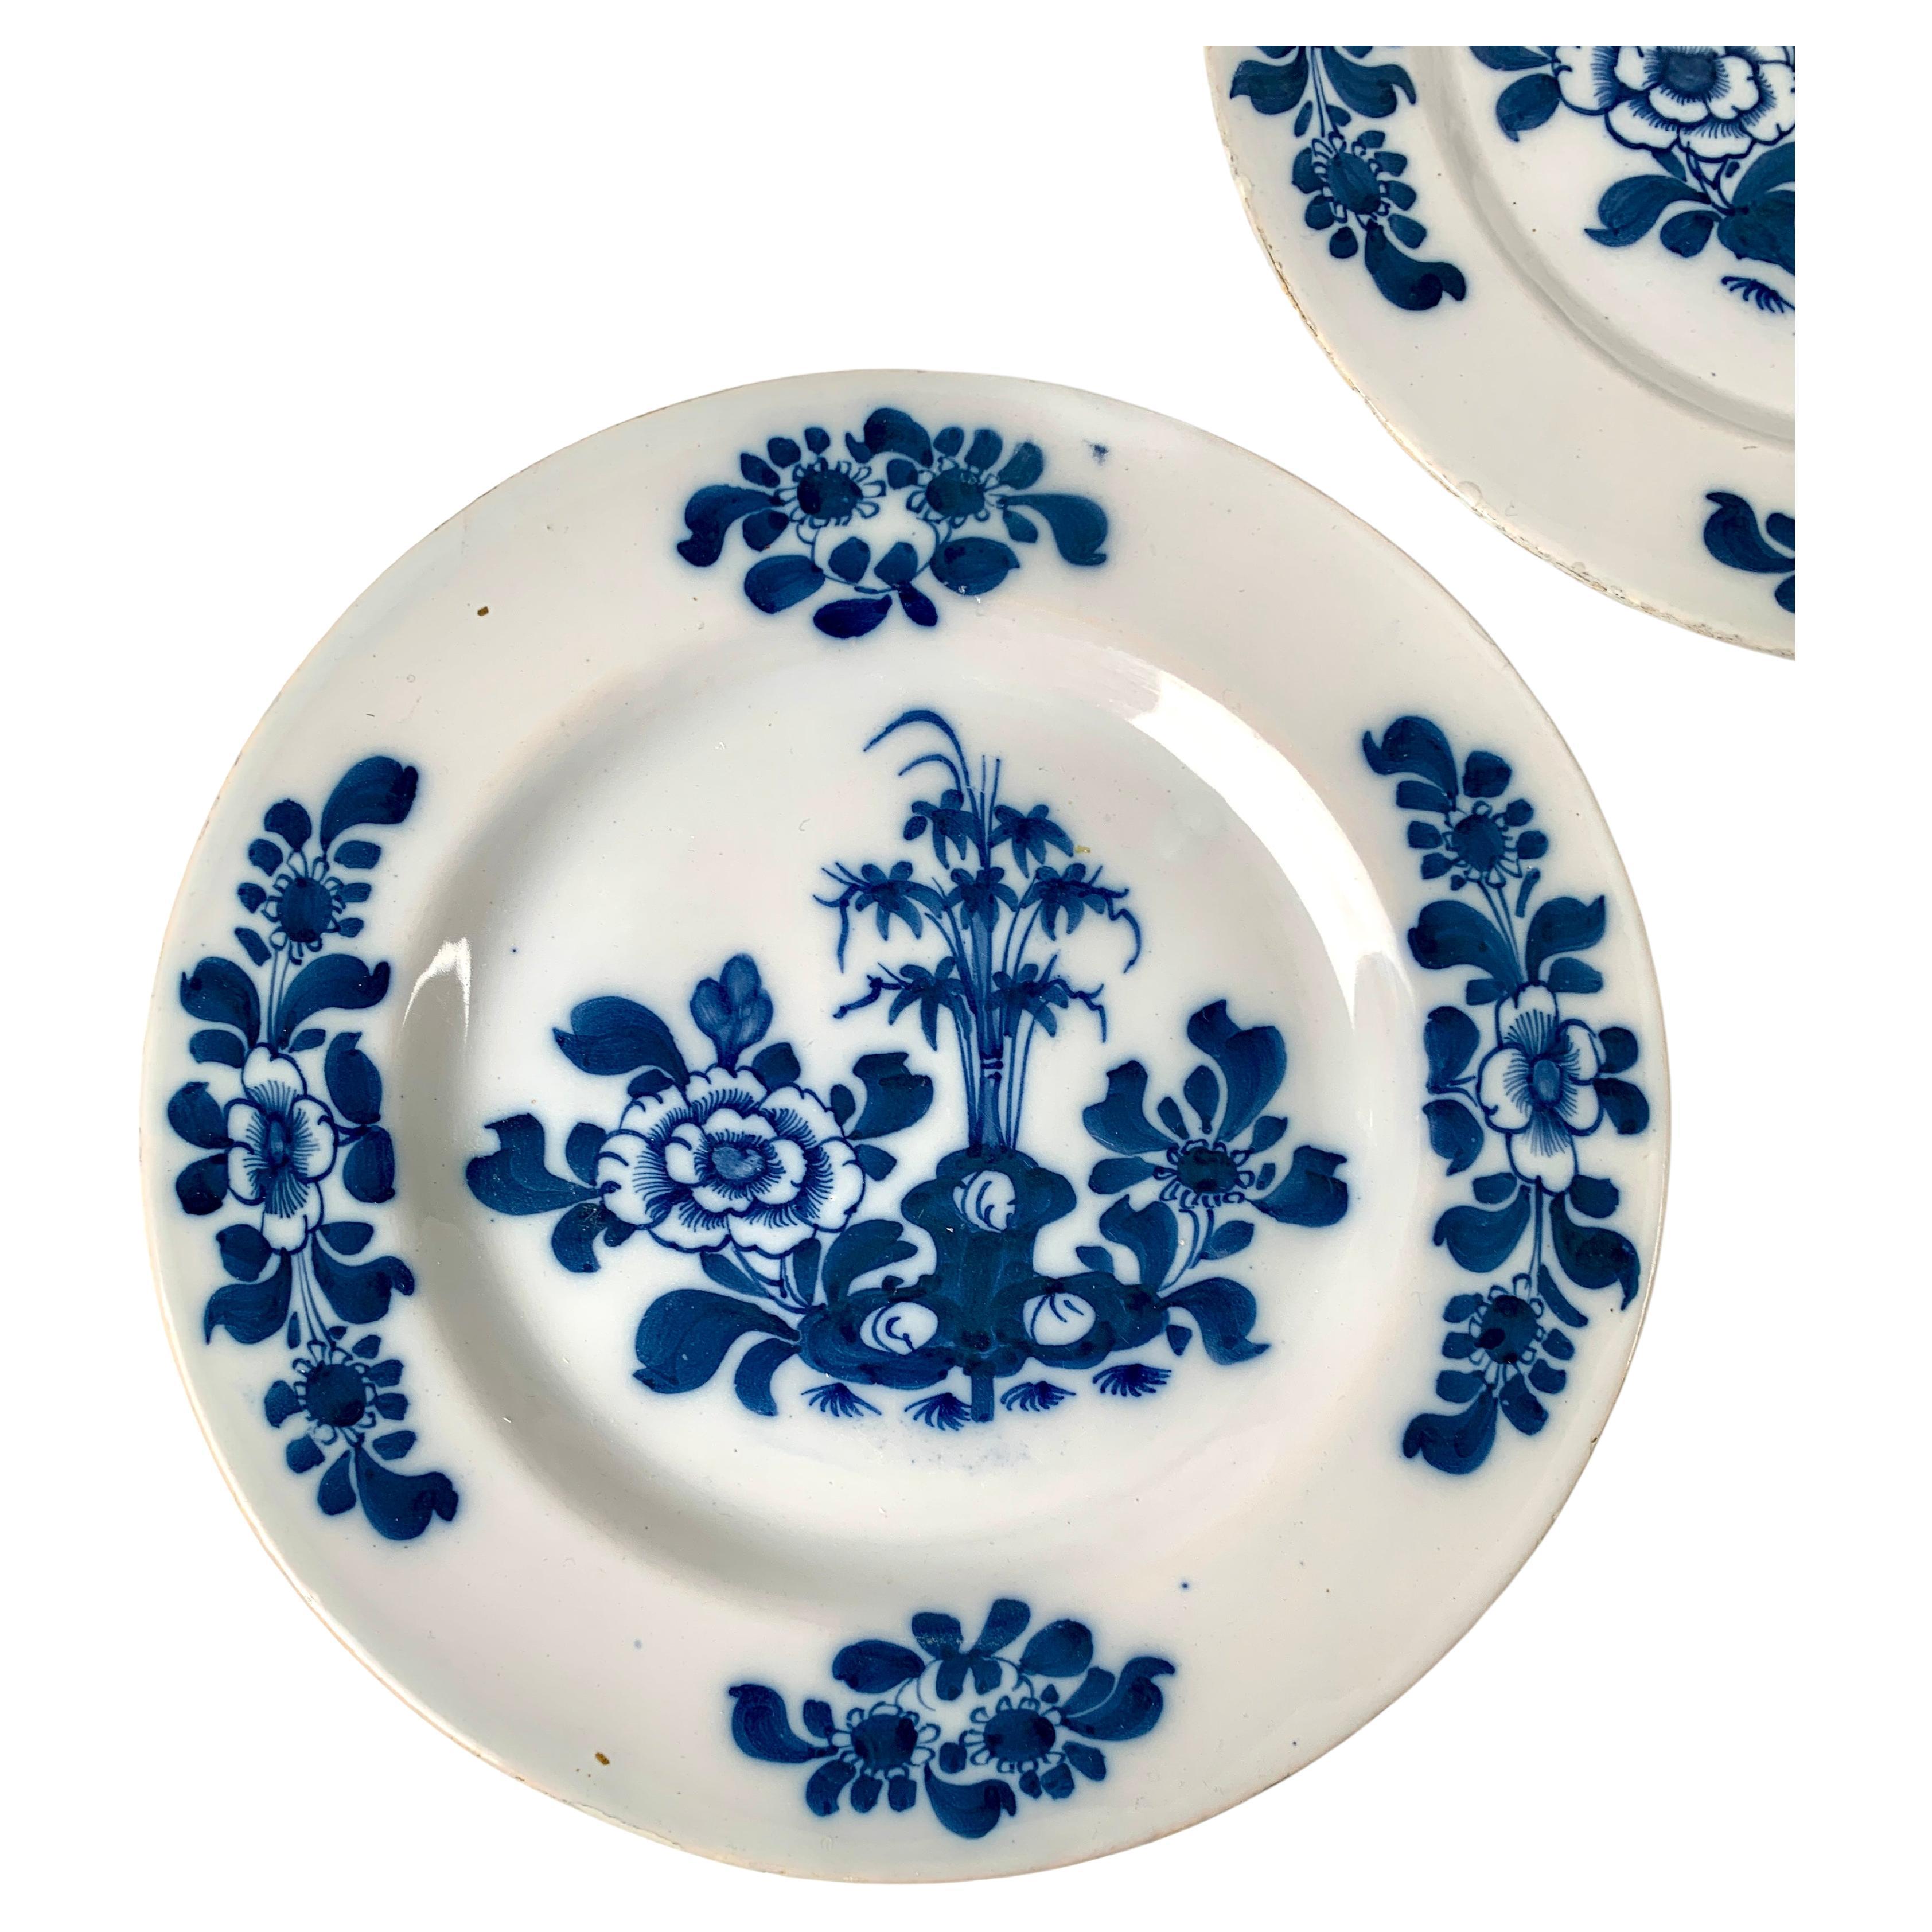 Set of 4 Blue and White Delft Plates or Dishes Hand Painted 18th Century England In Excellent Condition For Sale In Katonah, NY